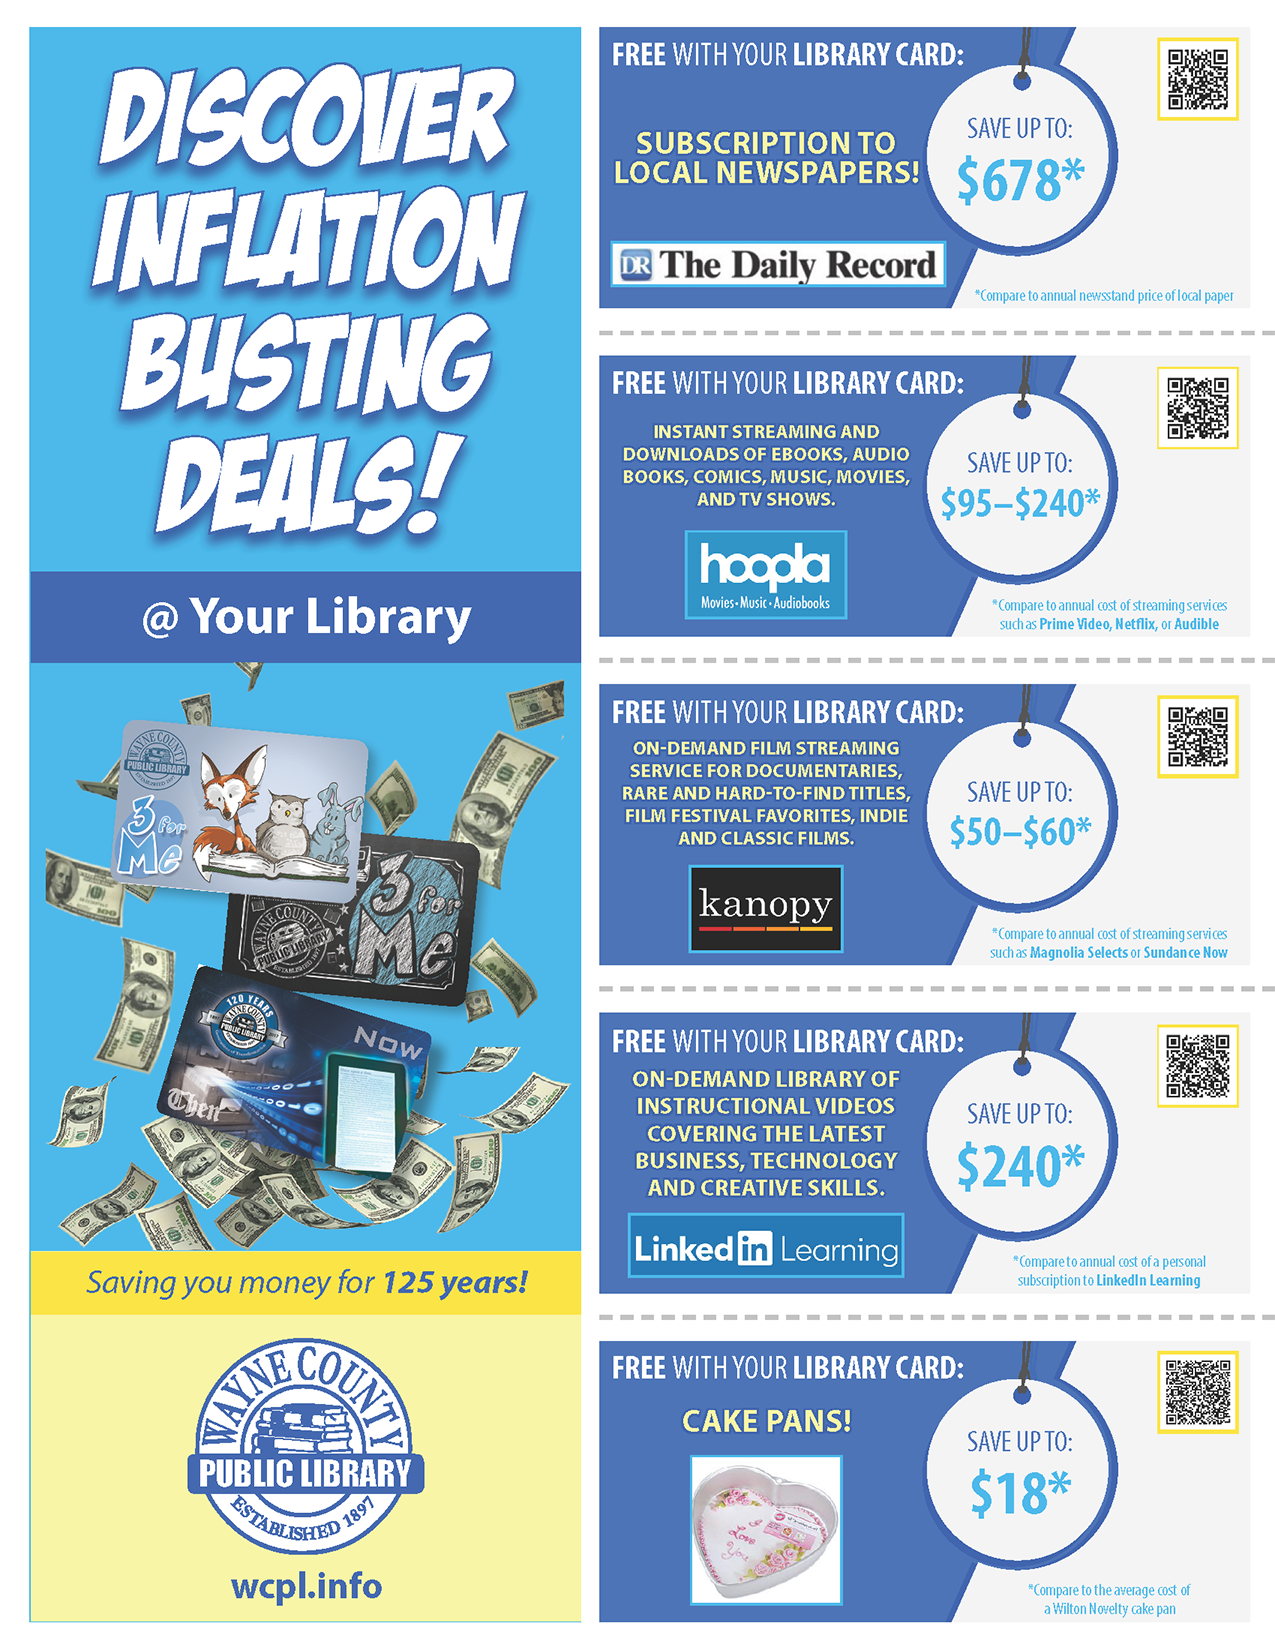 Discover Inflation Busting Deals at Your Library 1